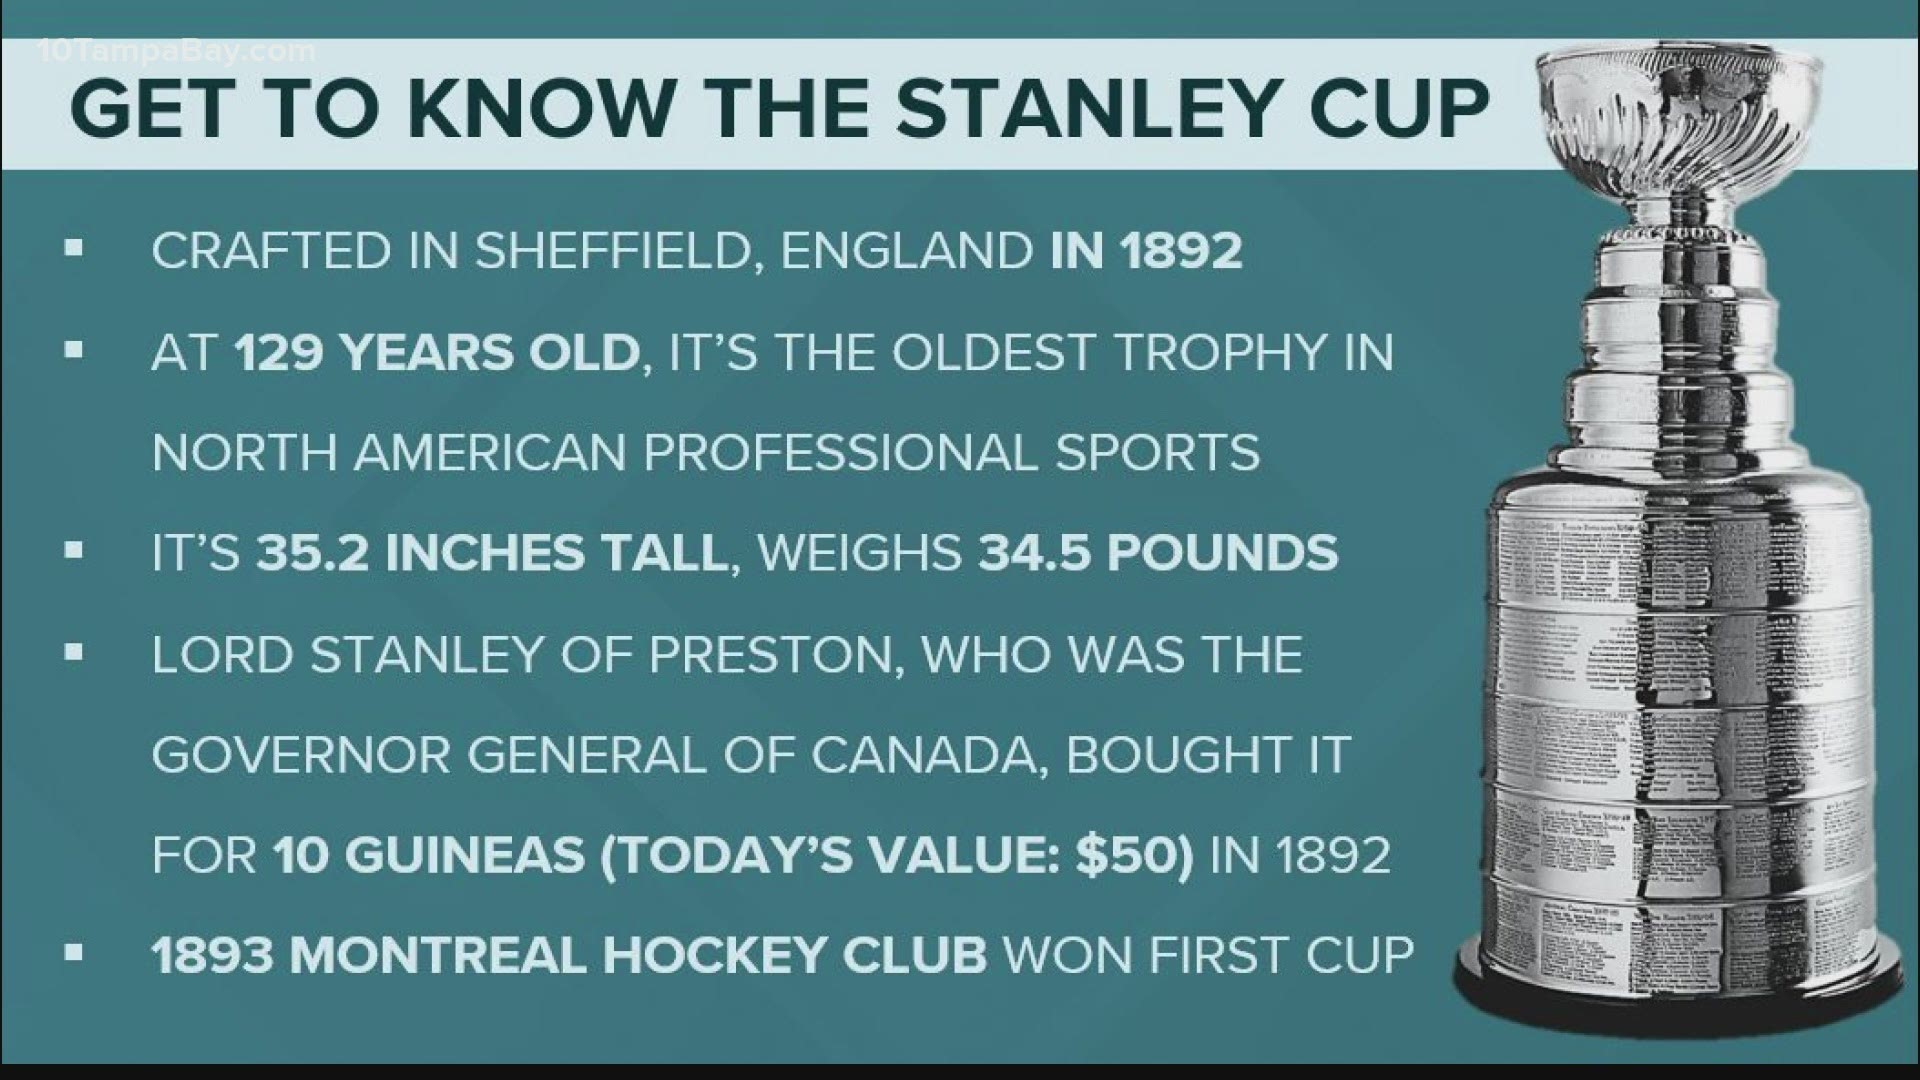 Hockey 101: The Origin of the Stanley Cup